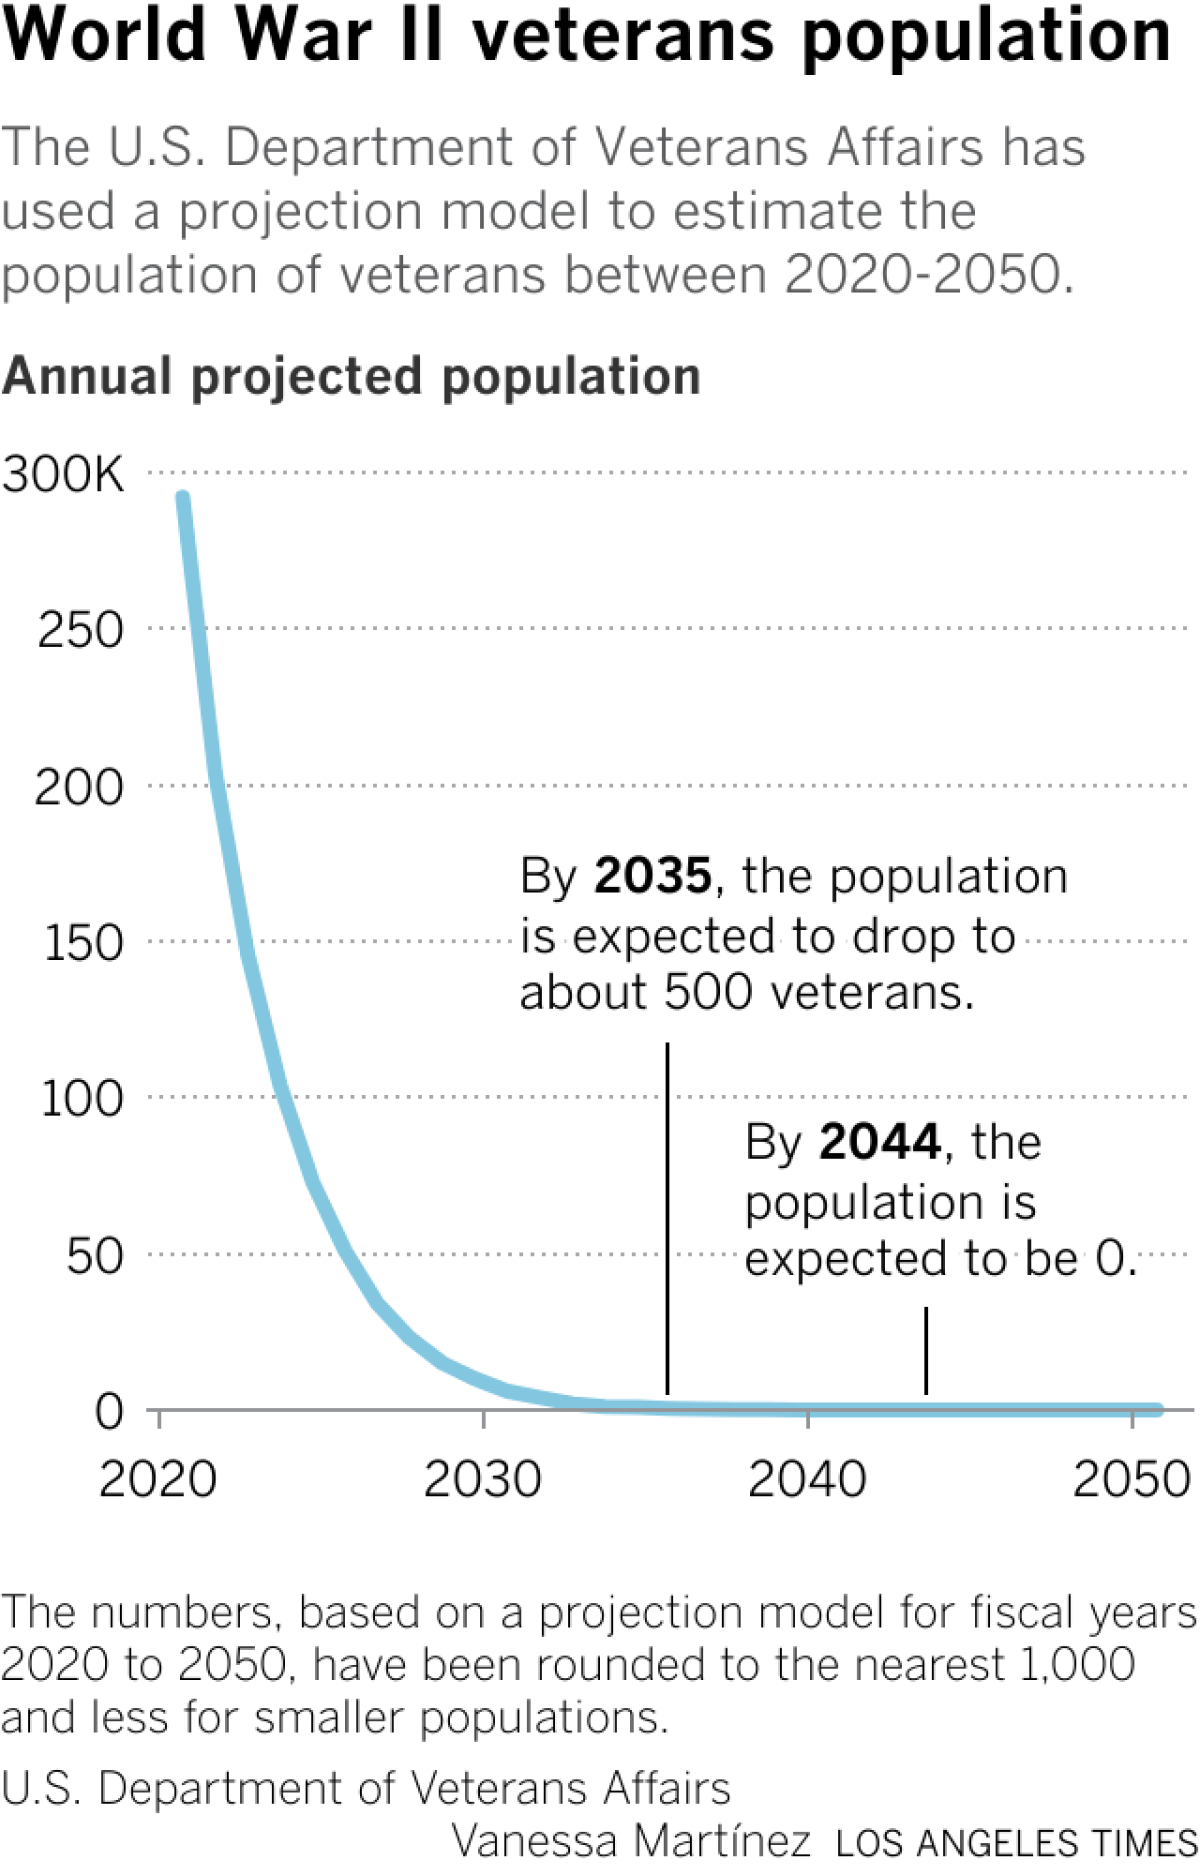 A line chart showing the annual projected population of World War Two veterans, according to a model by the U.S. Department of Veterans Affairs. By 2035, the population is expected to drop to about 500 veterans. By 2044, the population is expected to be 0.